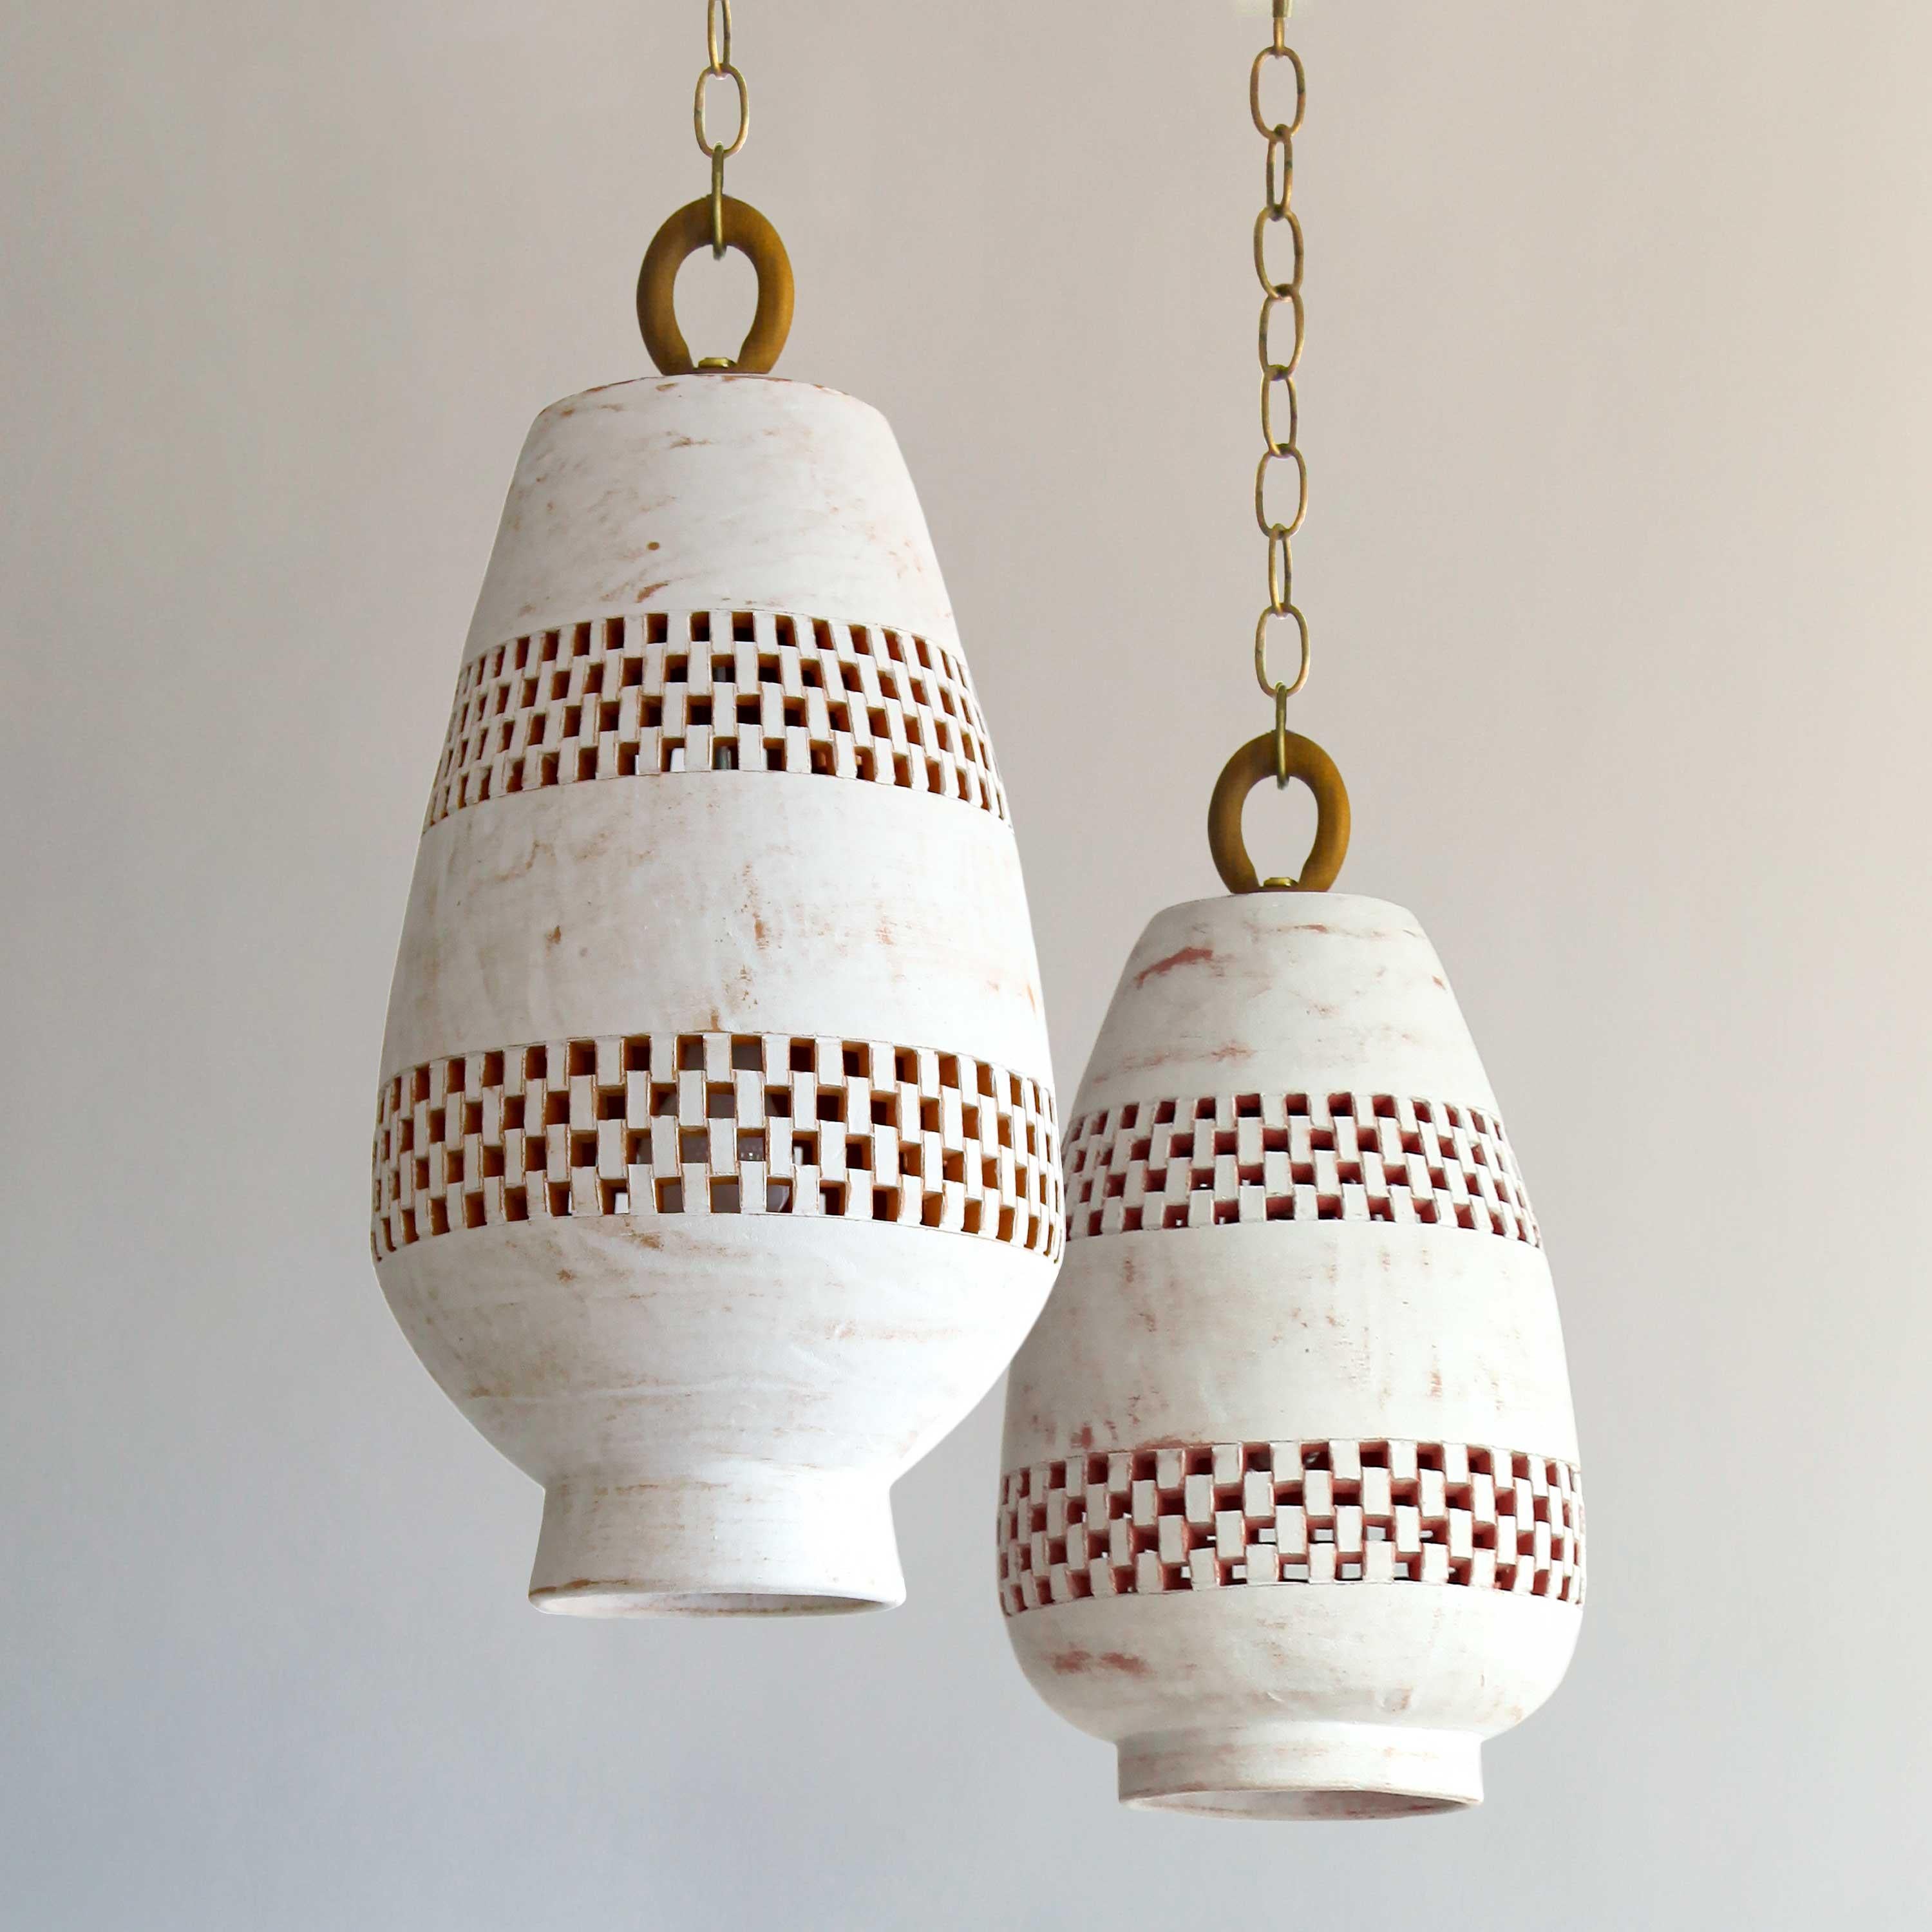 Hand-Crafted White Ceramic Pendant Light XL, Oiled Bronze, Ajedrez Atzompa Collection For Sale